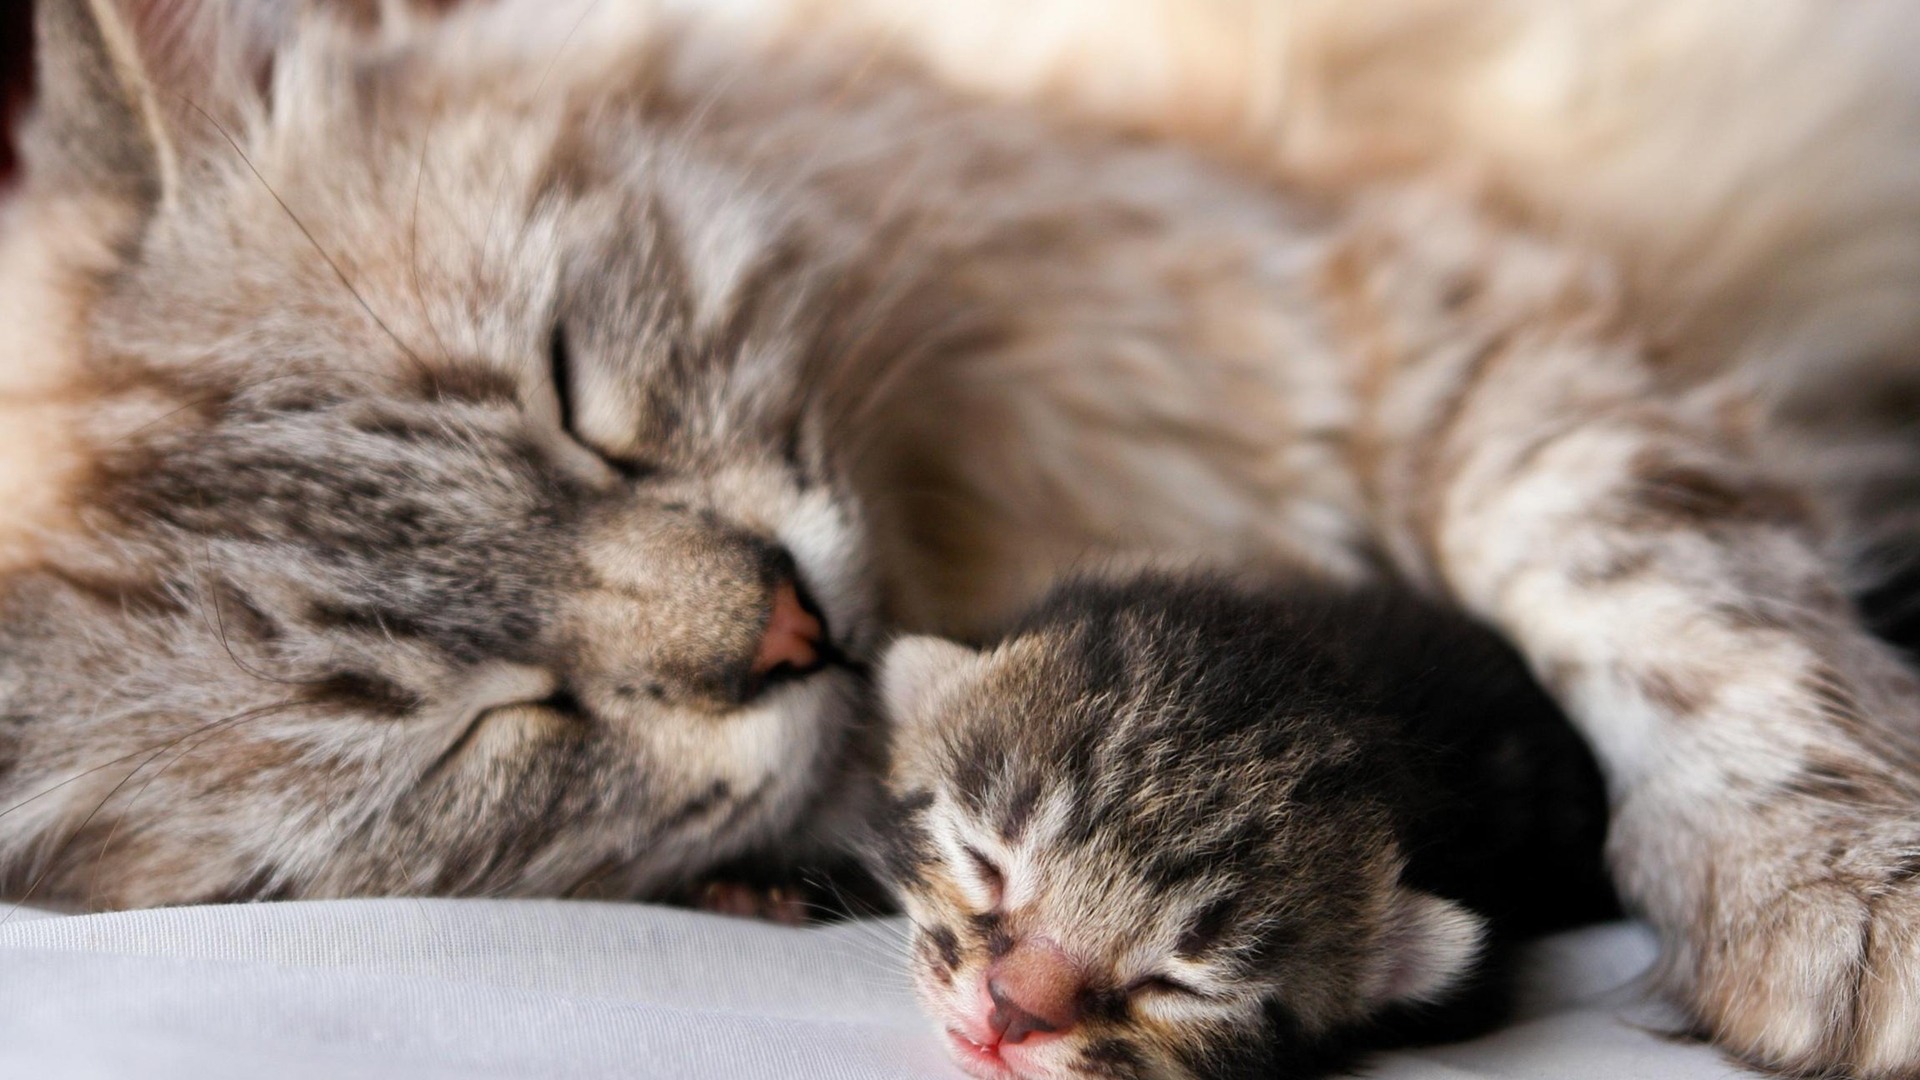 Cute Puppies And Kittens Wallpaper For Mobile - Mother And Baby Cats , HD Wallpaper & Backgrounds